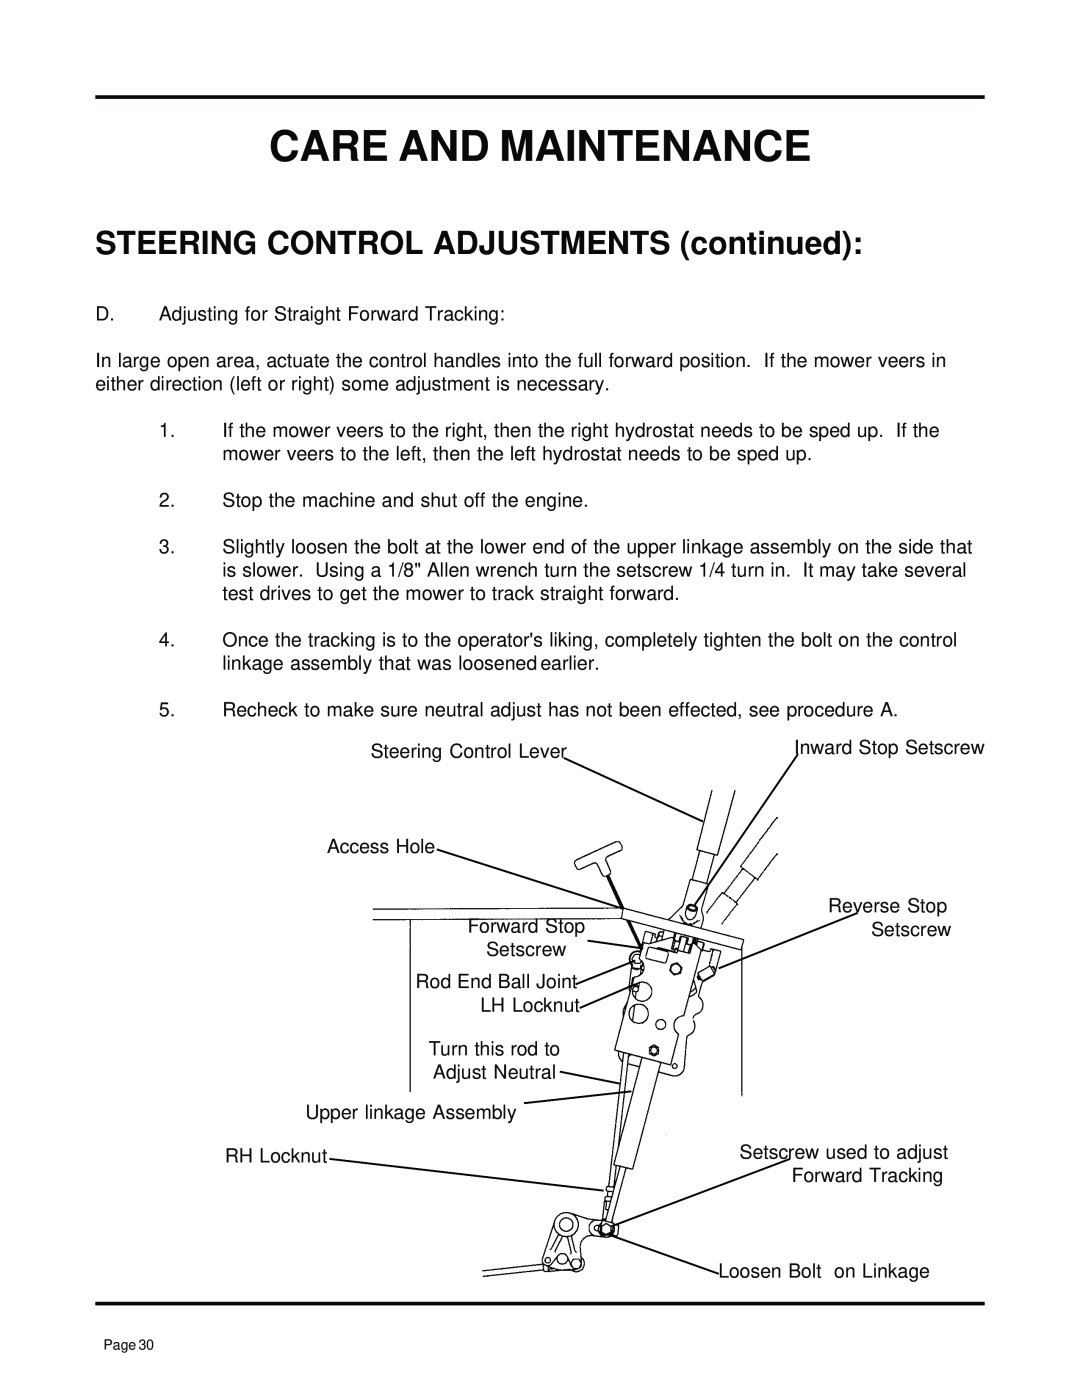 Dixon ZTR 7025, 13091-0500 manual STEERING CONTROL ADJUSTMENTS continued, Care And Maintenance 